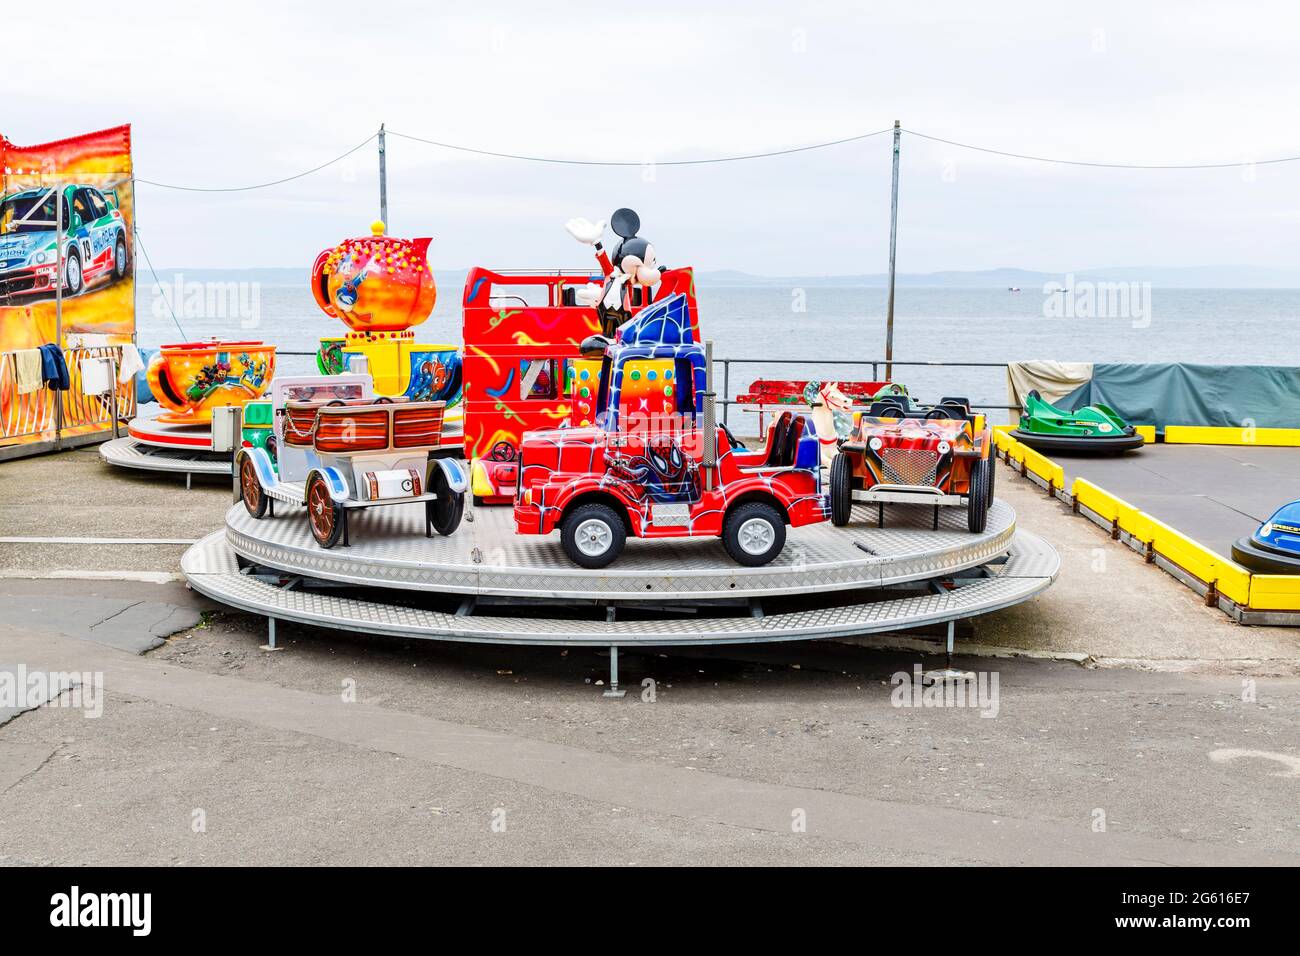 Fairground ride in the seaside town of Largs, North Ayrshire, Scotland, UK Stock Photo